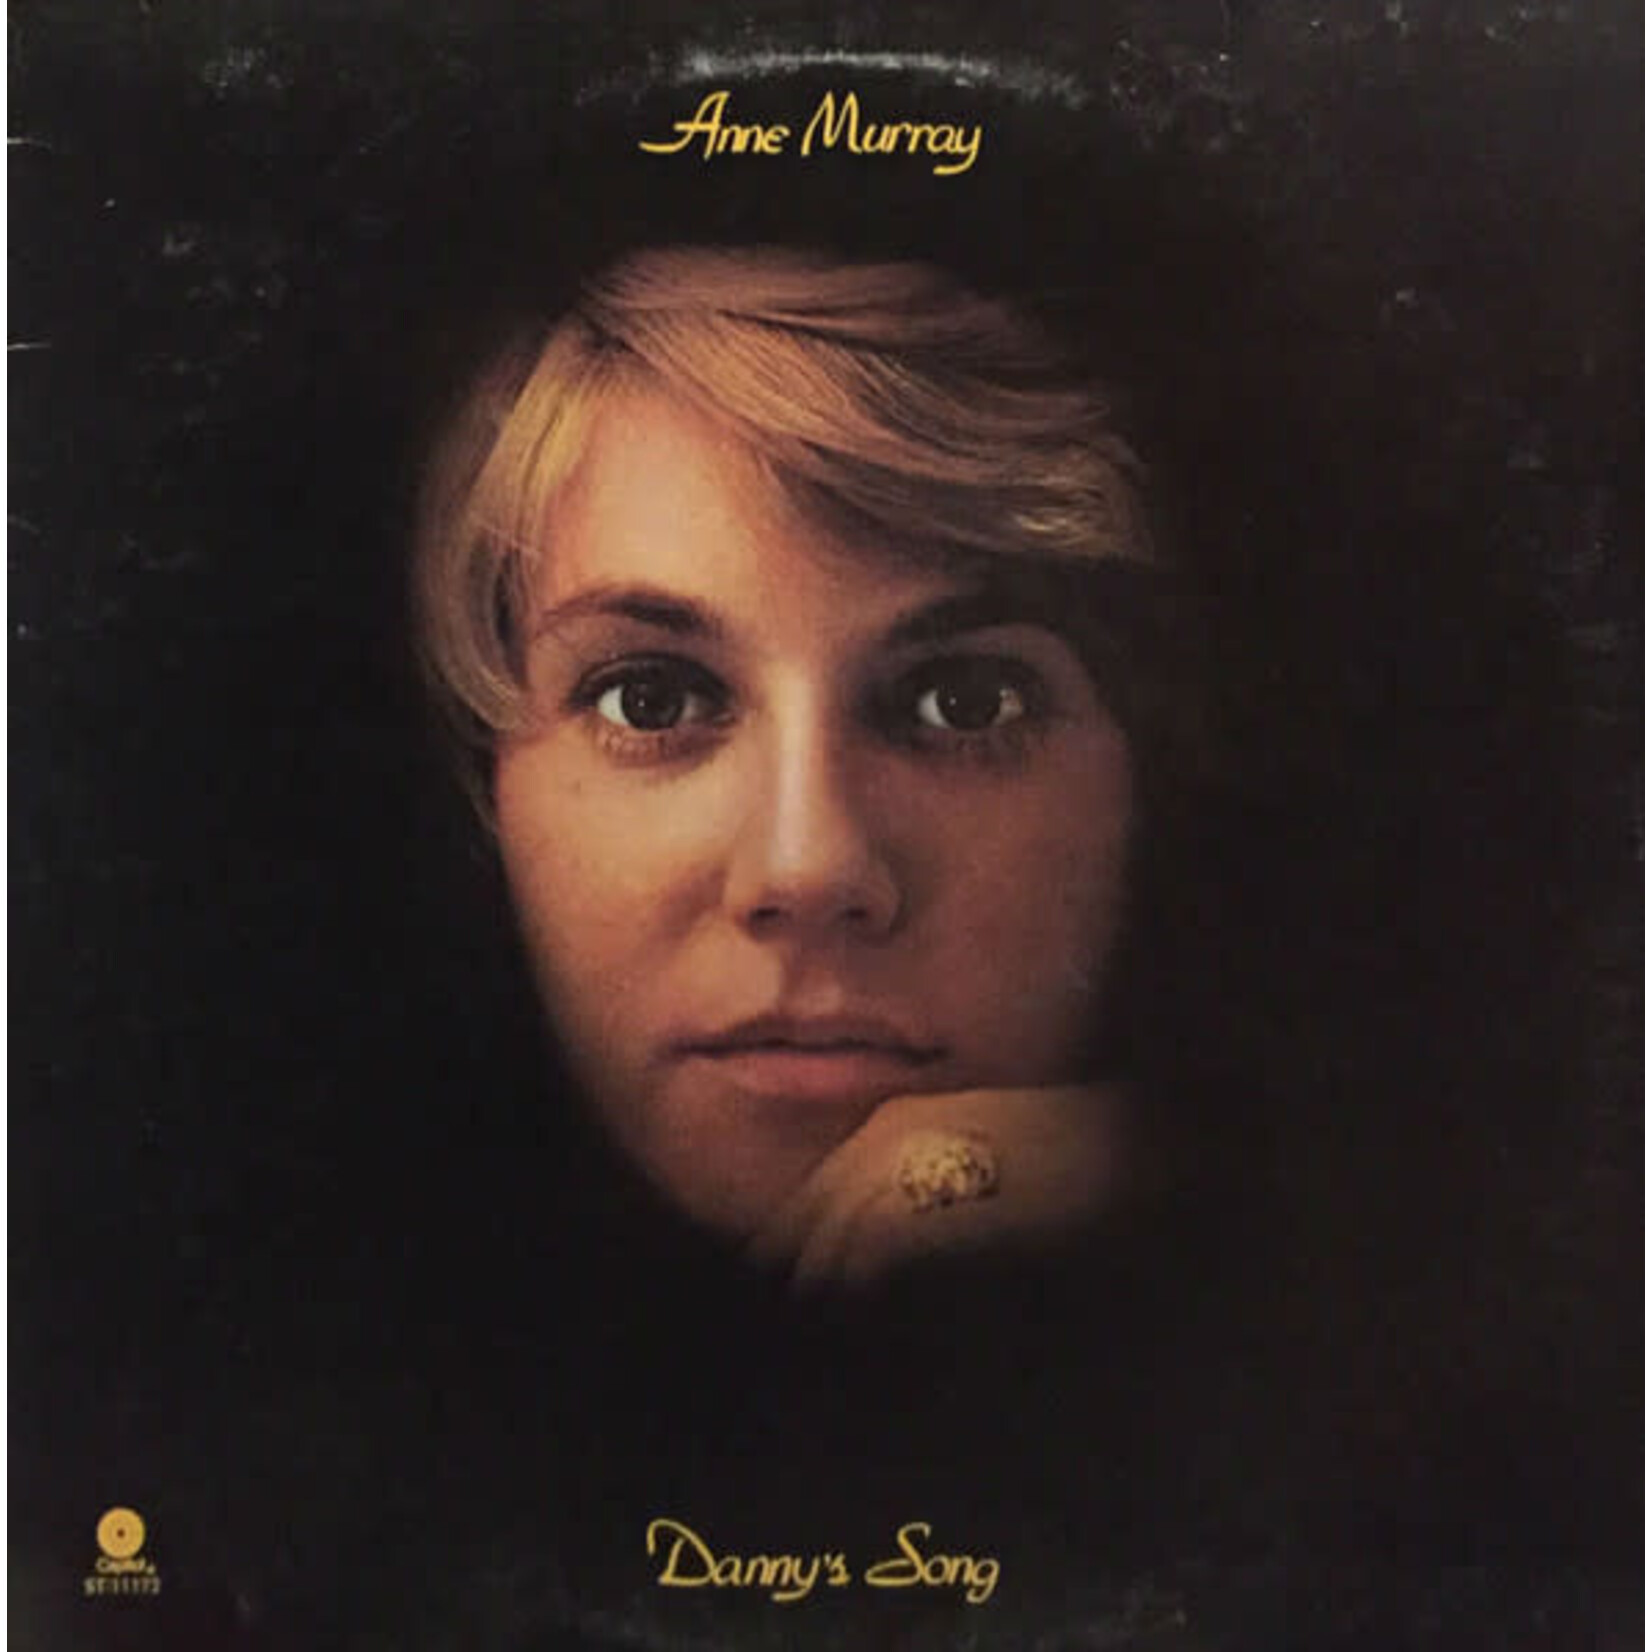 Anne Murray Anne Murray – Danny's Song (VG, 1973, LP, Capitol Records – ST-11172) SCAZ